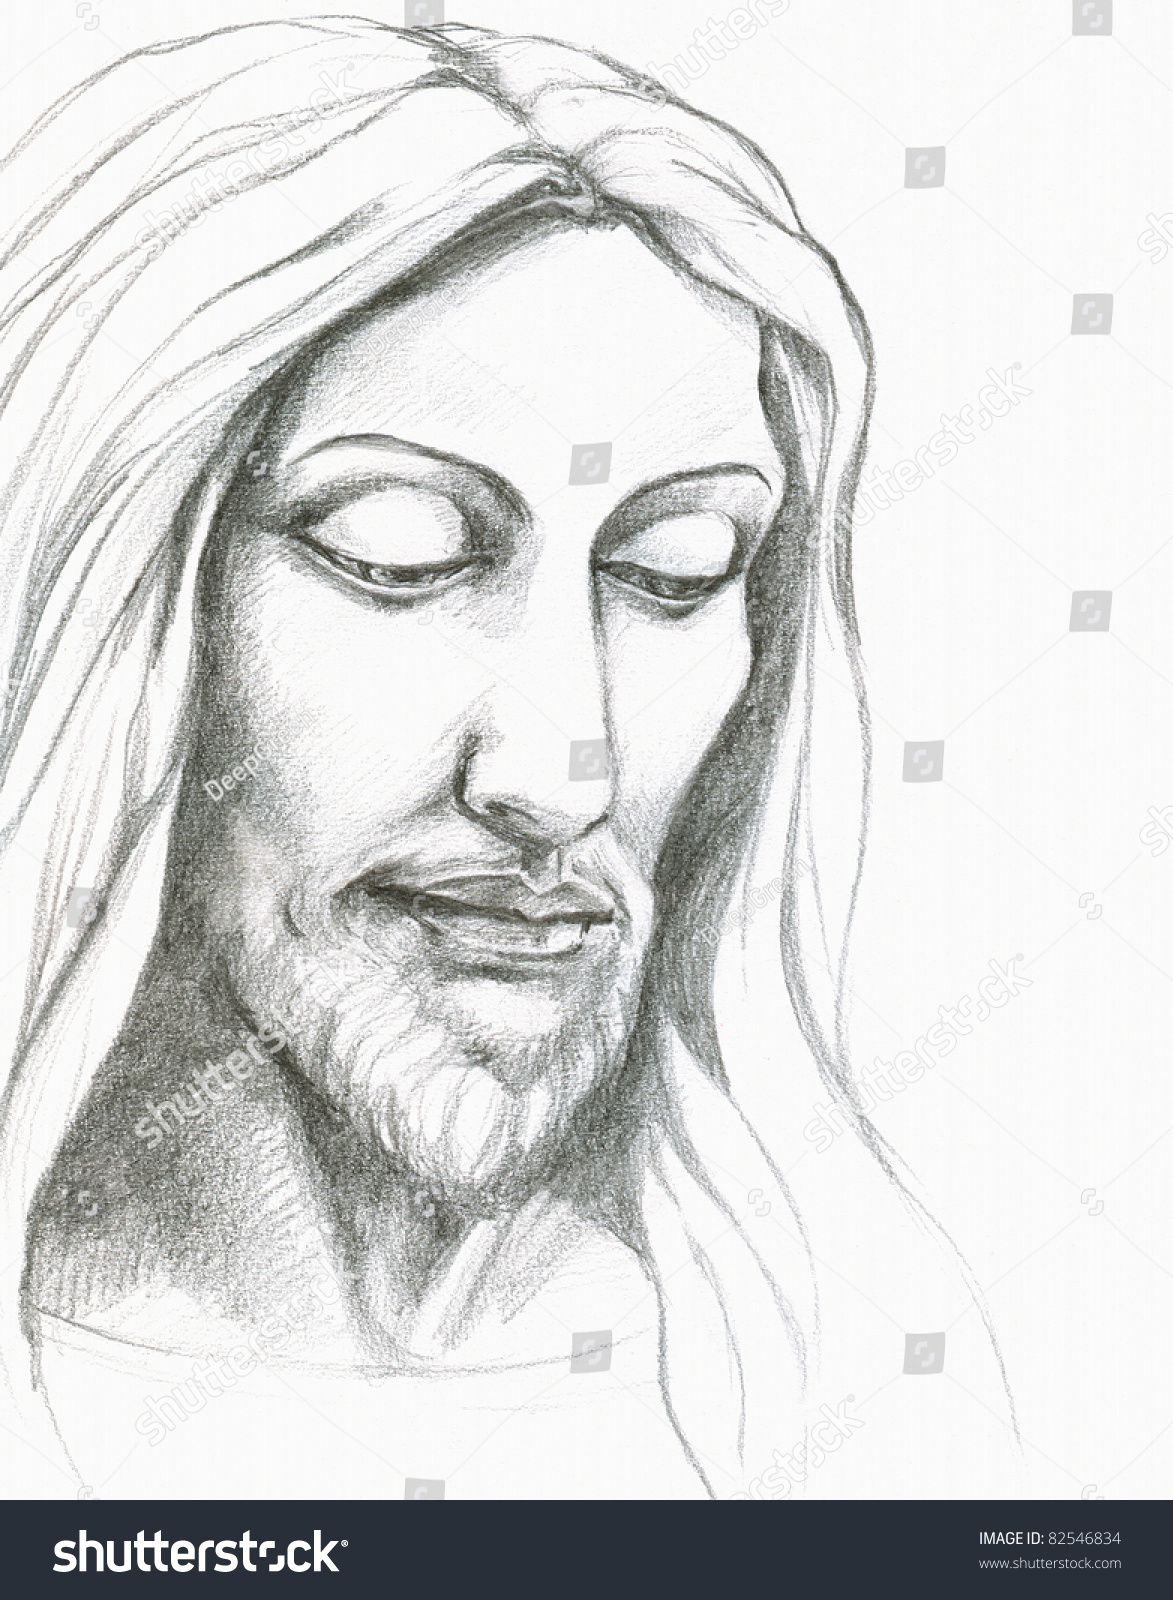 Portrait Of Jesus Christ.Picture I Have Created With Pencil On A Paper ...